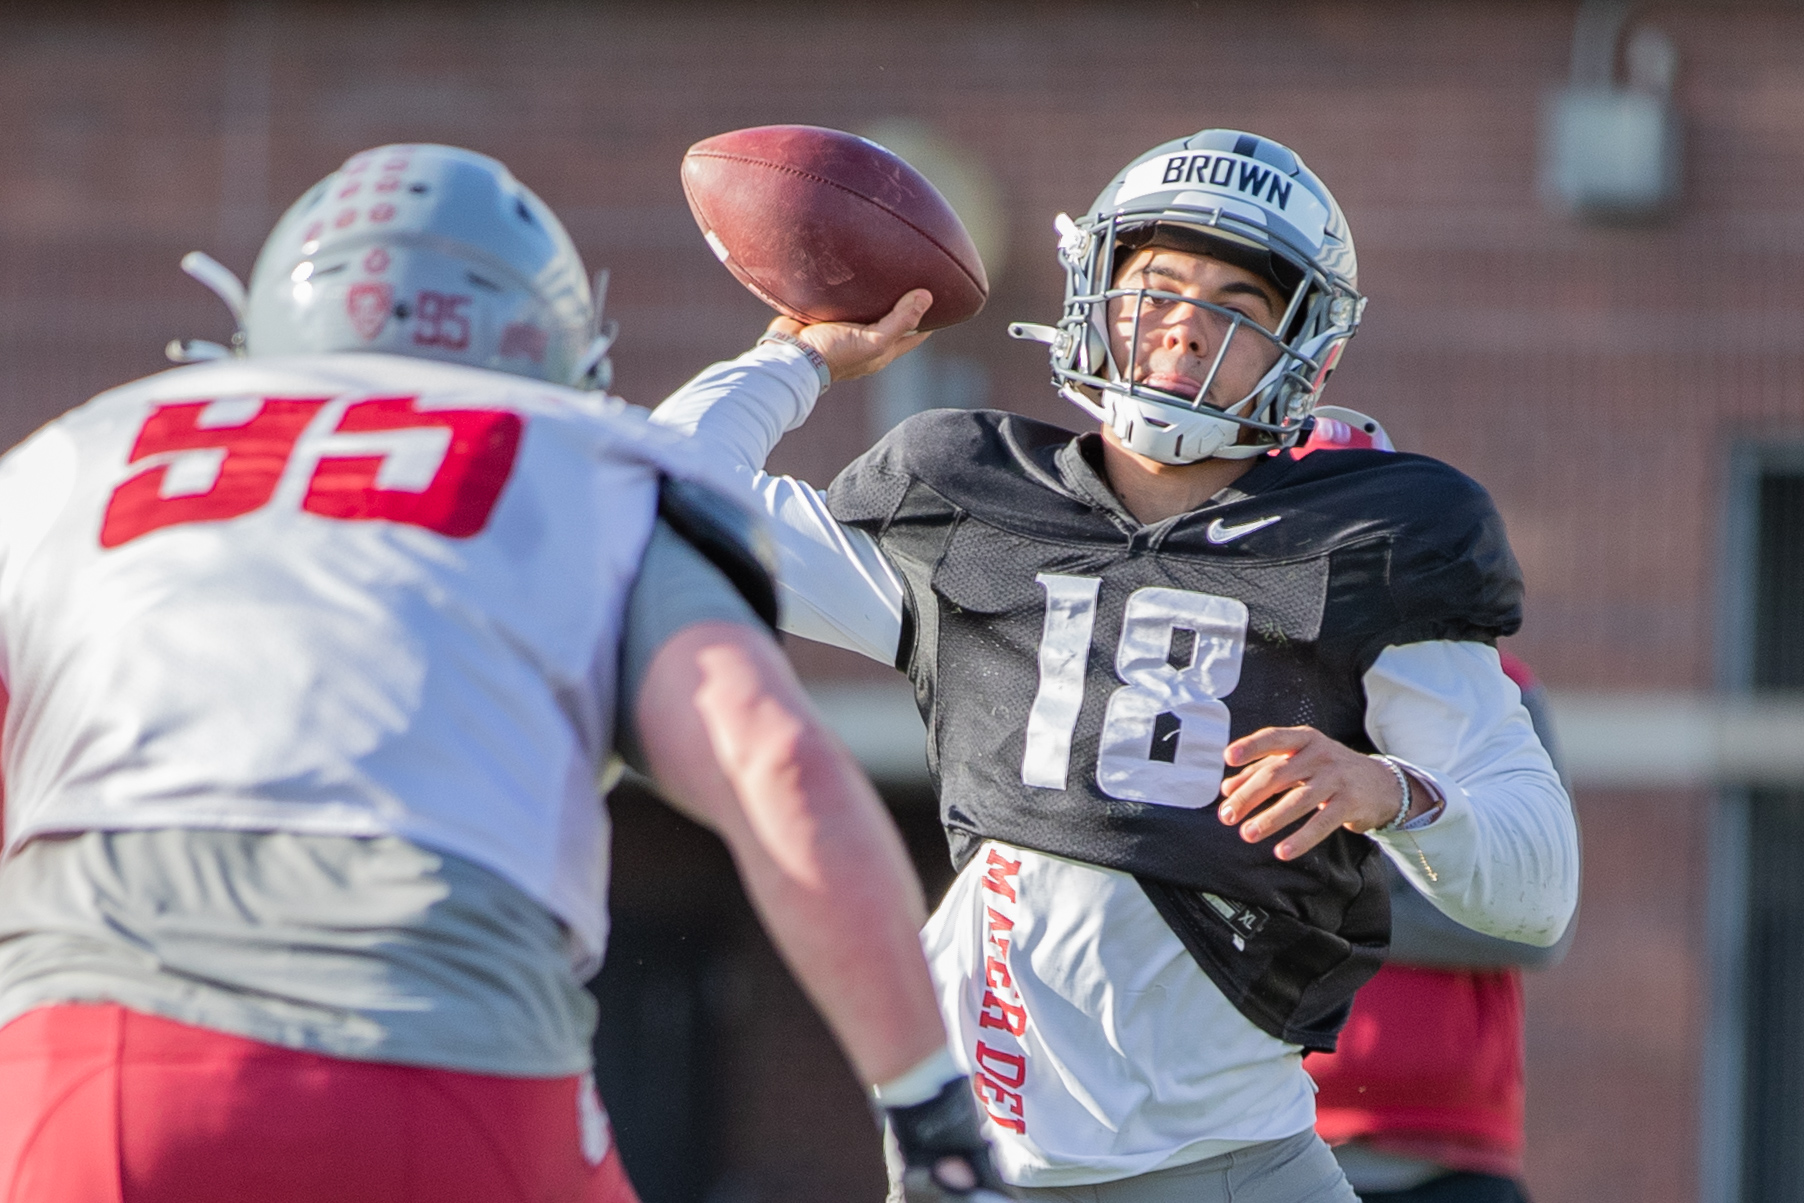 PULLMAN, WA - APRIL 8: Washington State Cougars football program takes to Rogers Field for spring practice